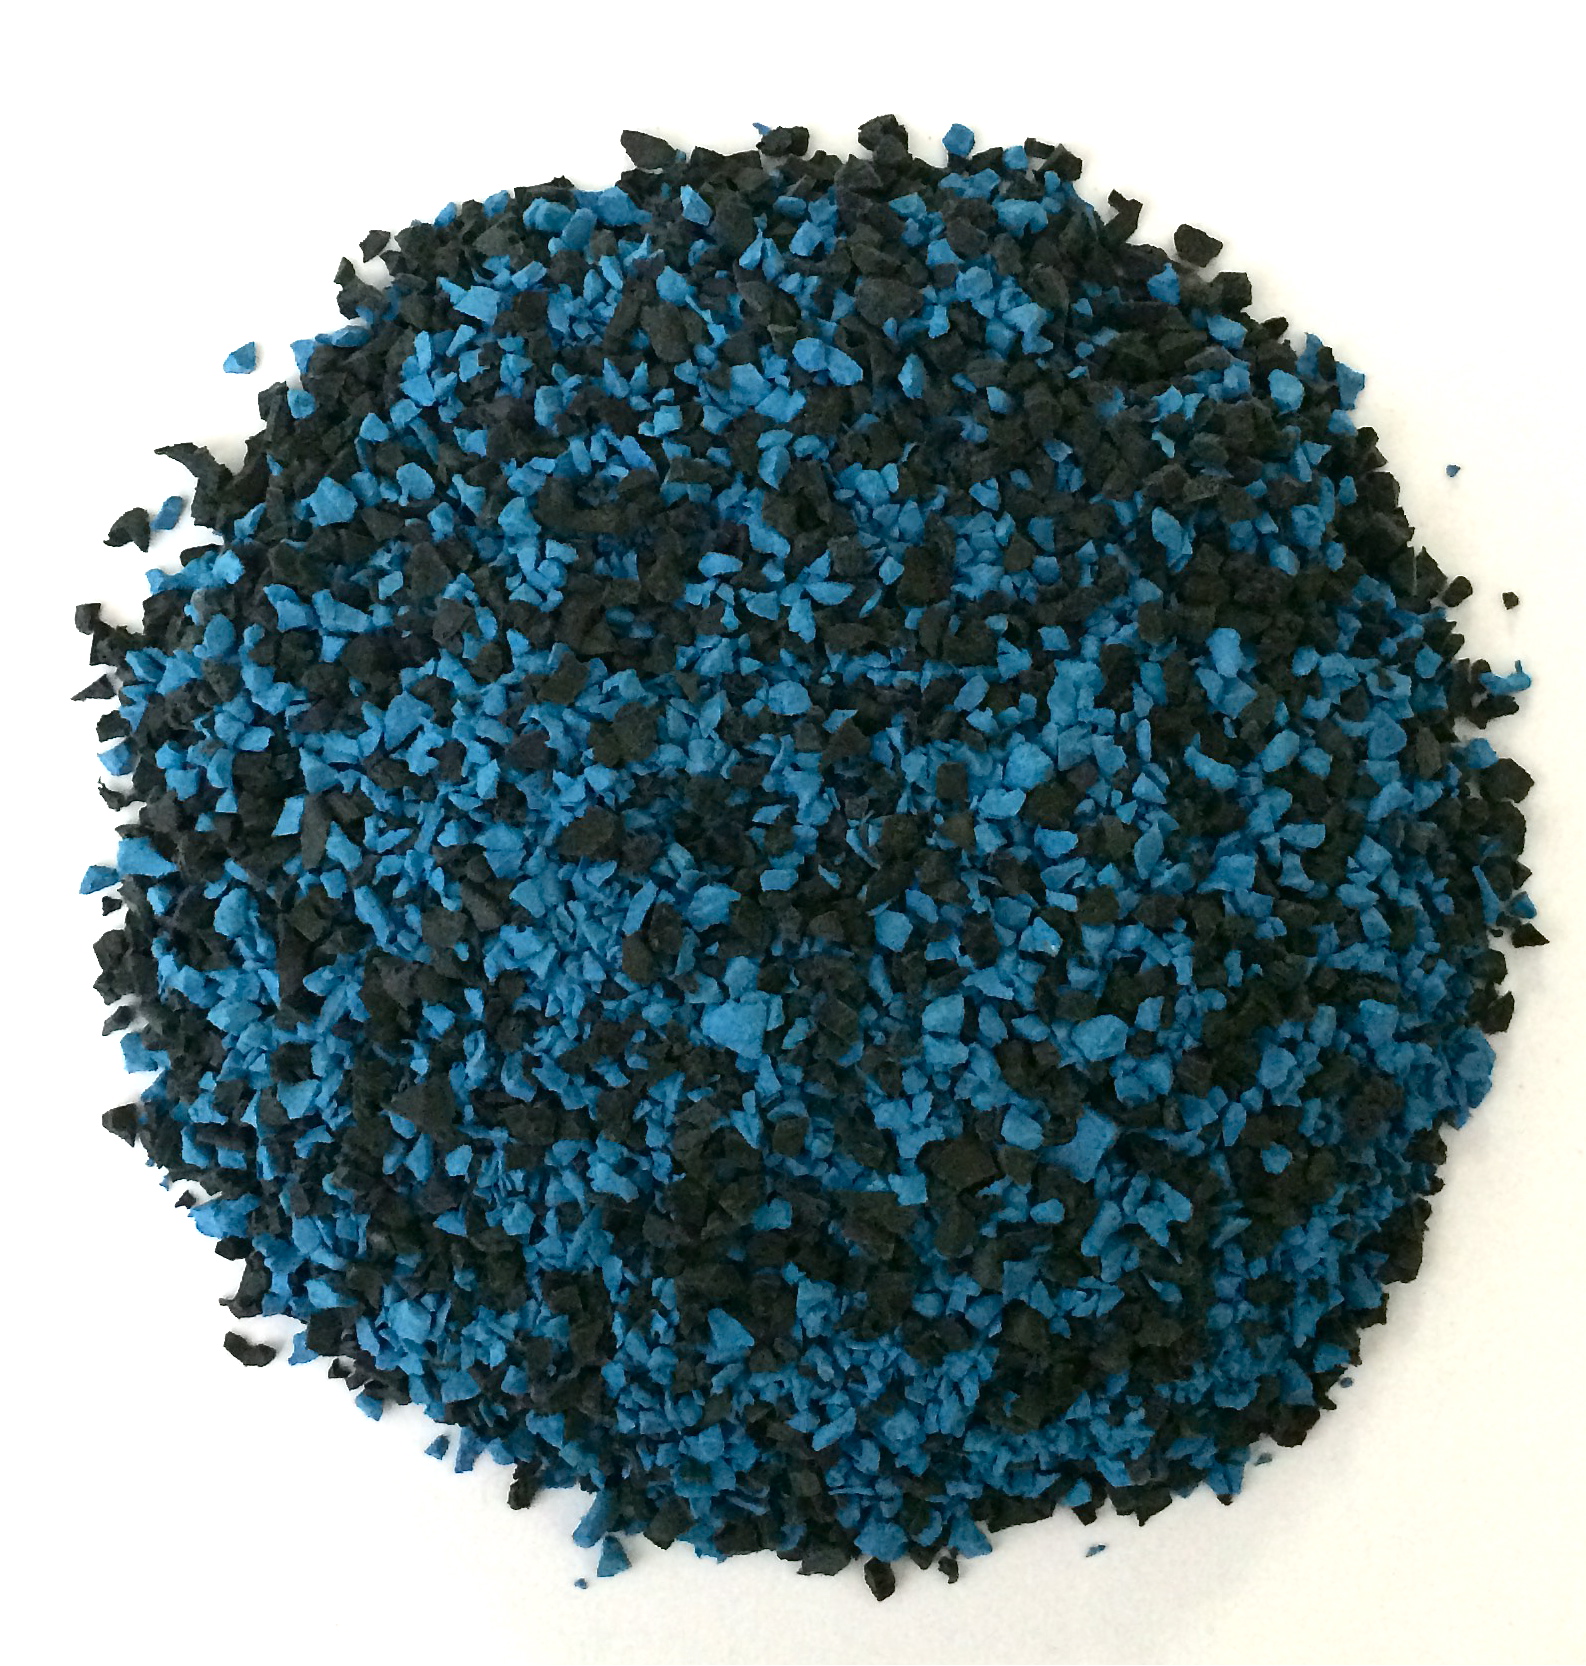 blue and black poured in place rubber repair patch kit